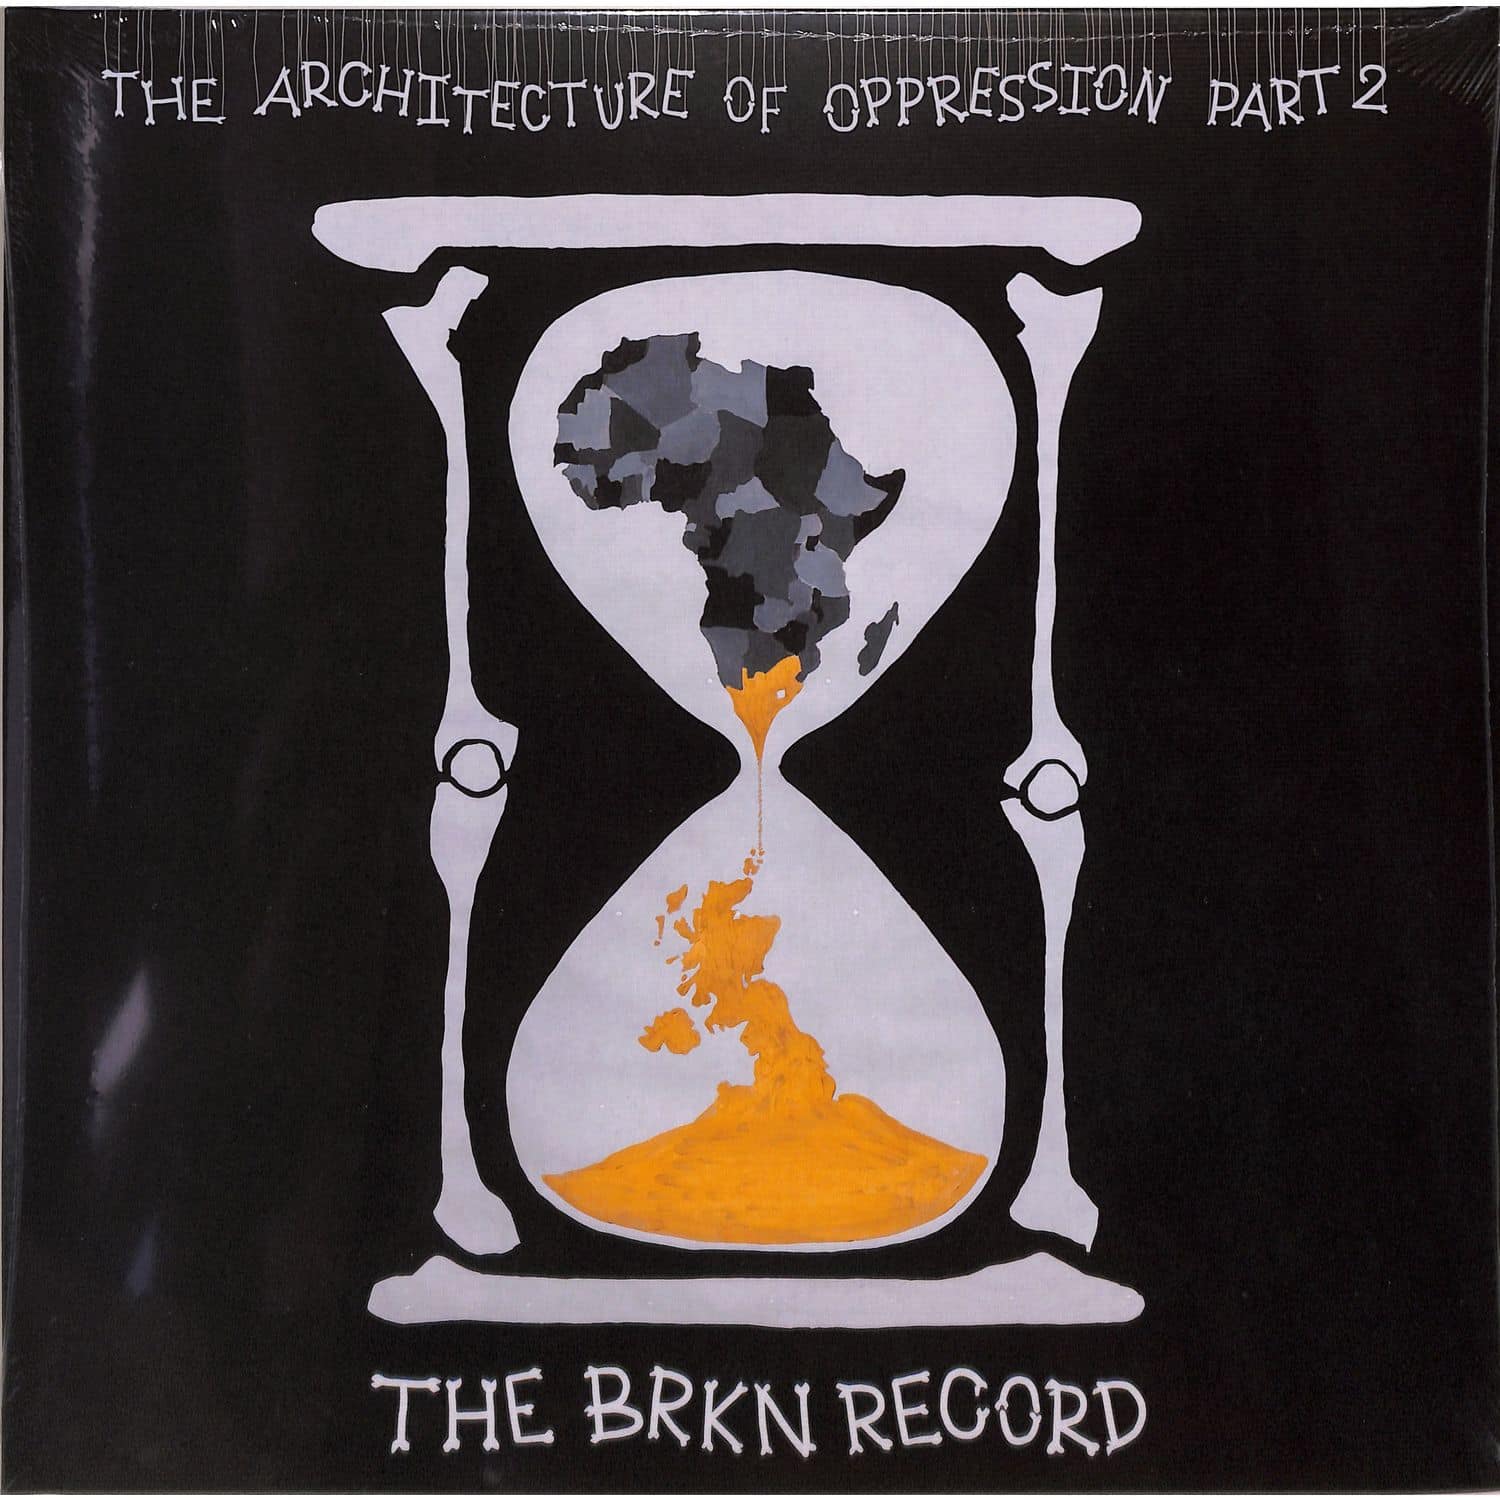 The Brkn Record - THE ARCHITECTURE OF OPPRESSION PART 2 